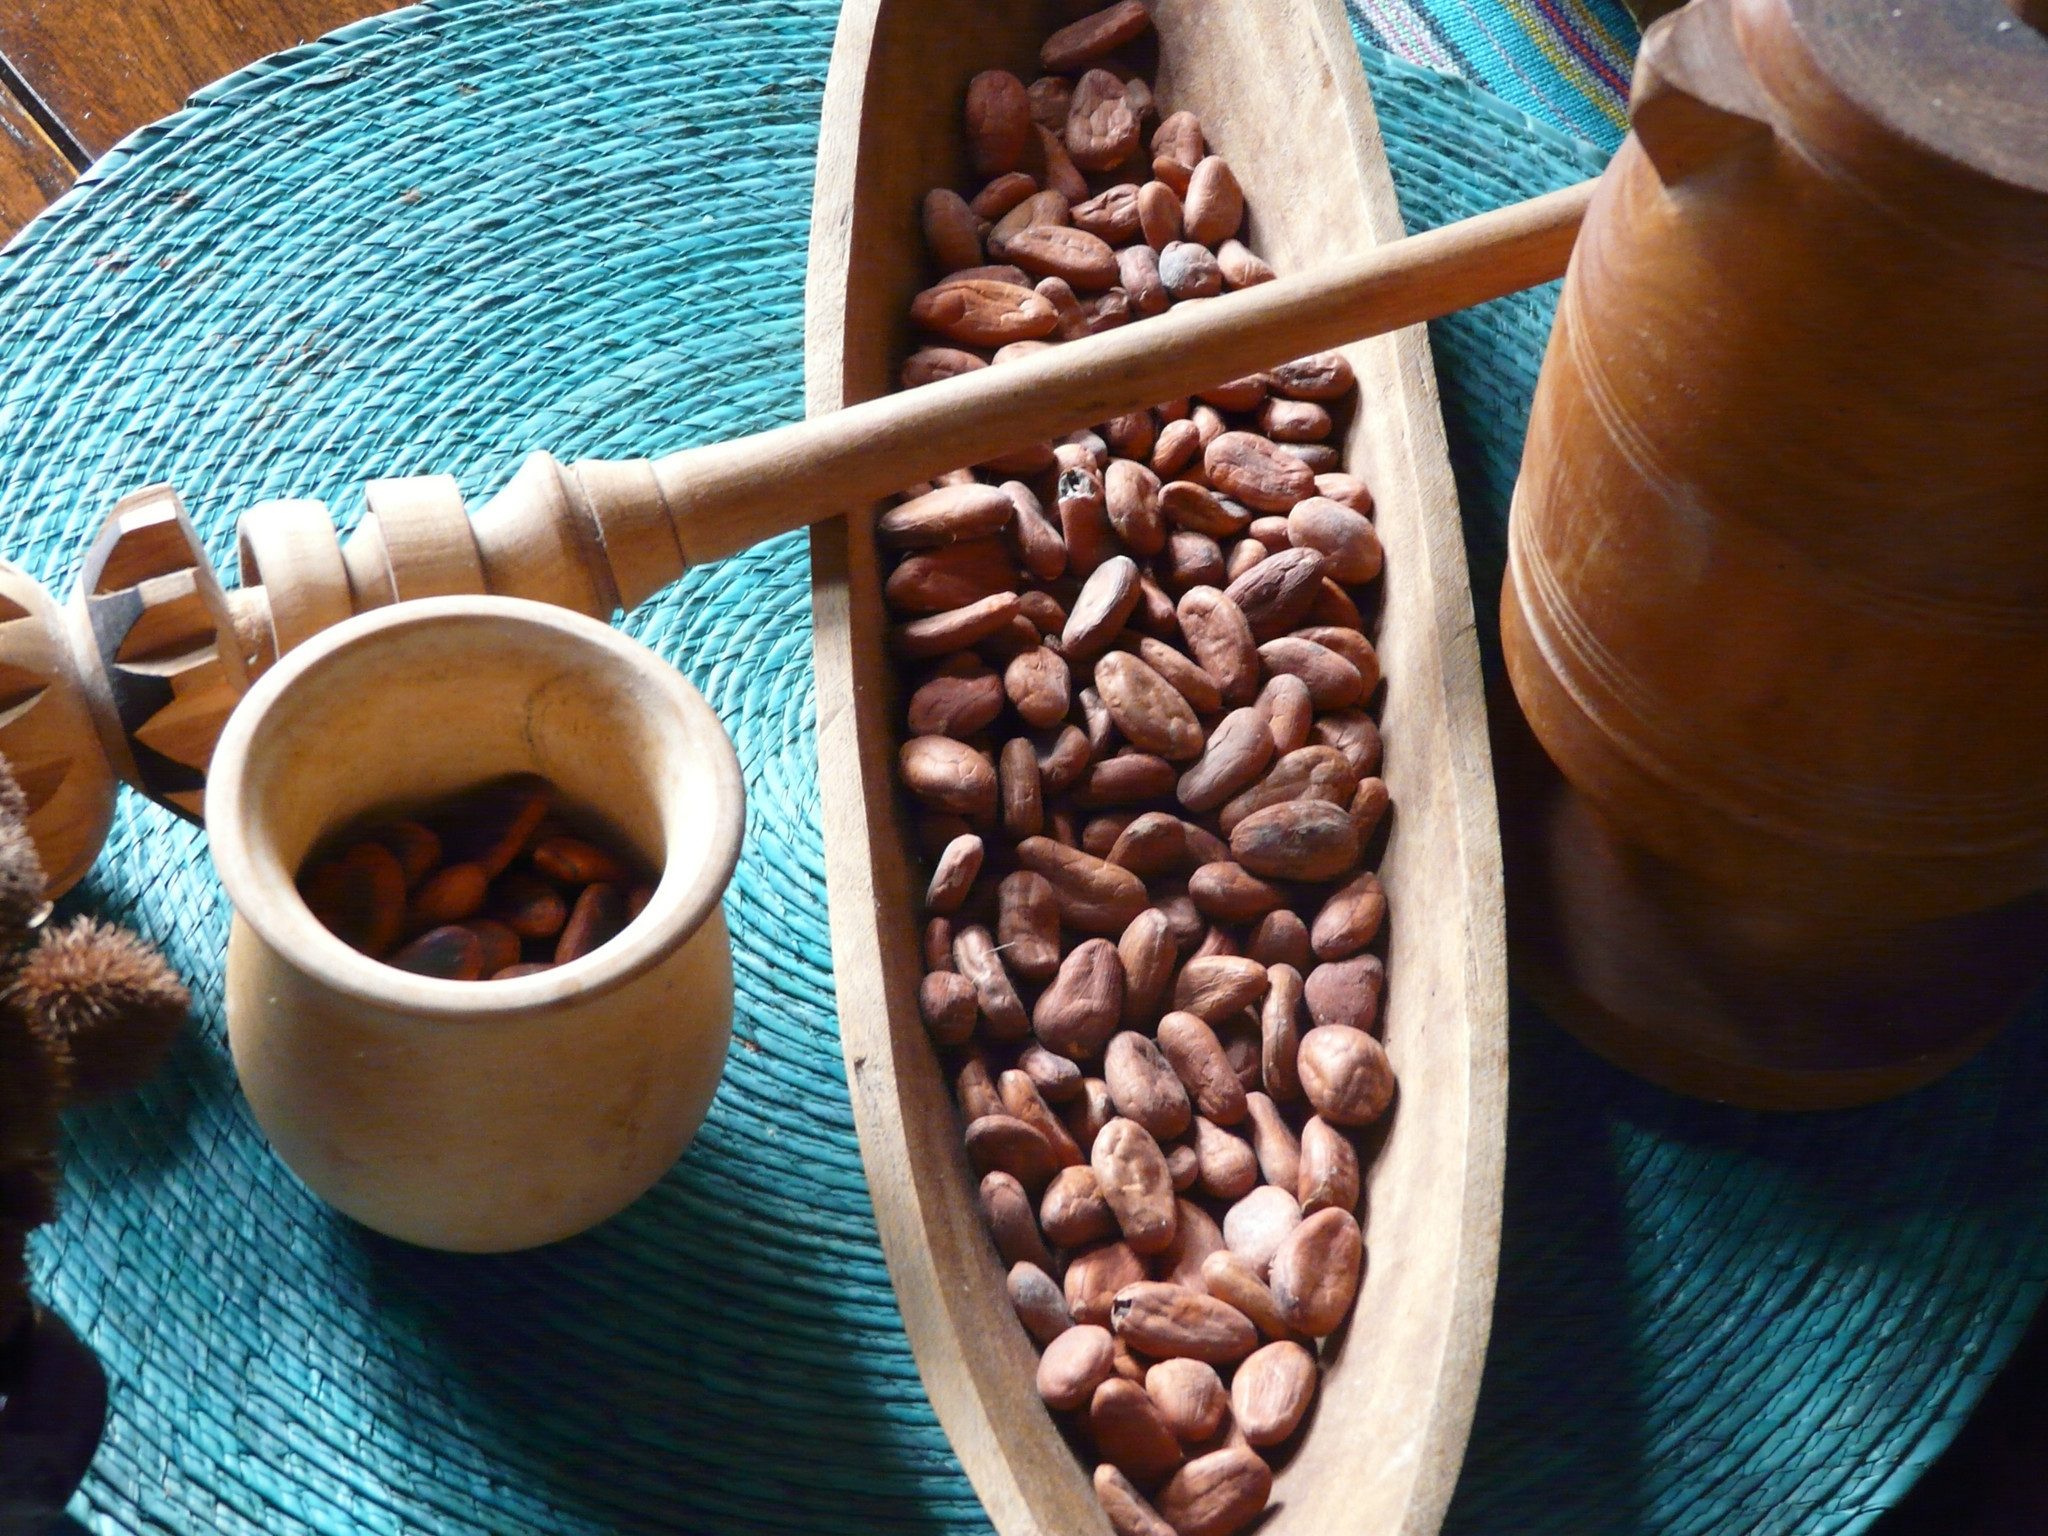 Cacao Beans In A Serving Tray